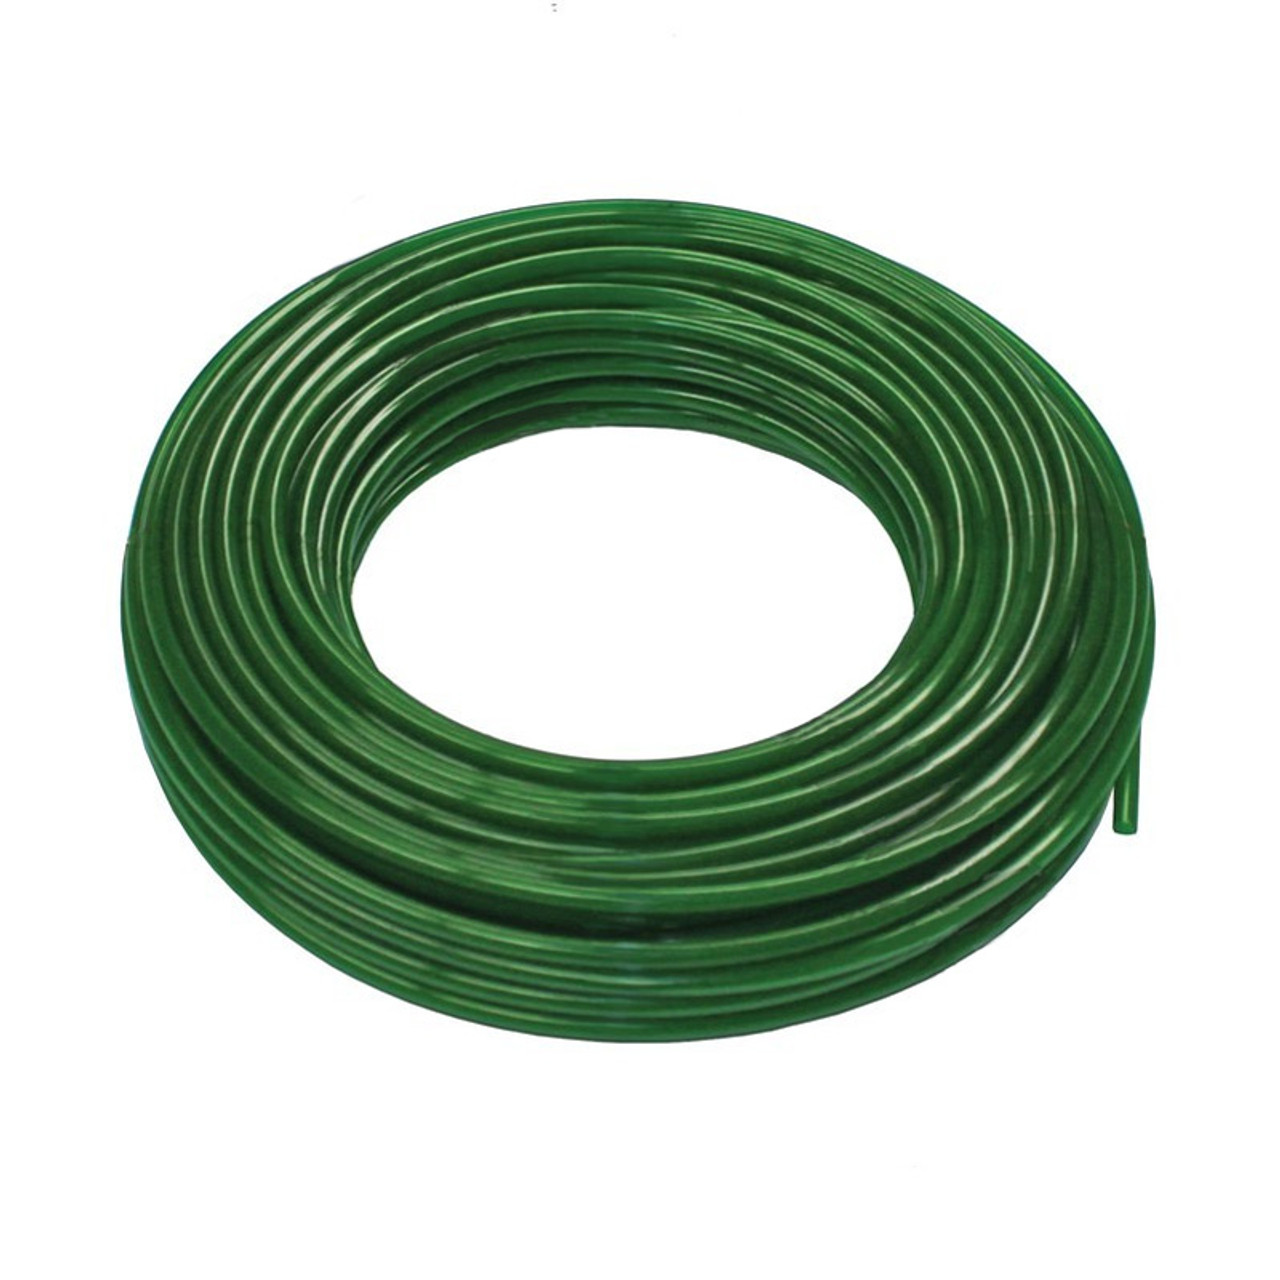 100ft Commercial Truck Air Line & Electrical Cable Spiral Wrap 1 1/2" Diameter 